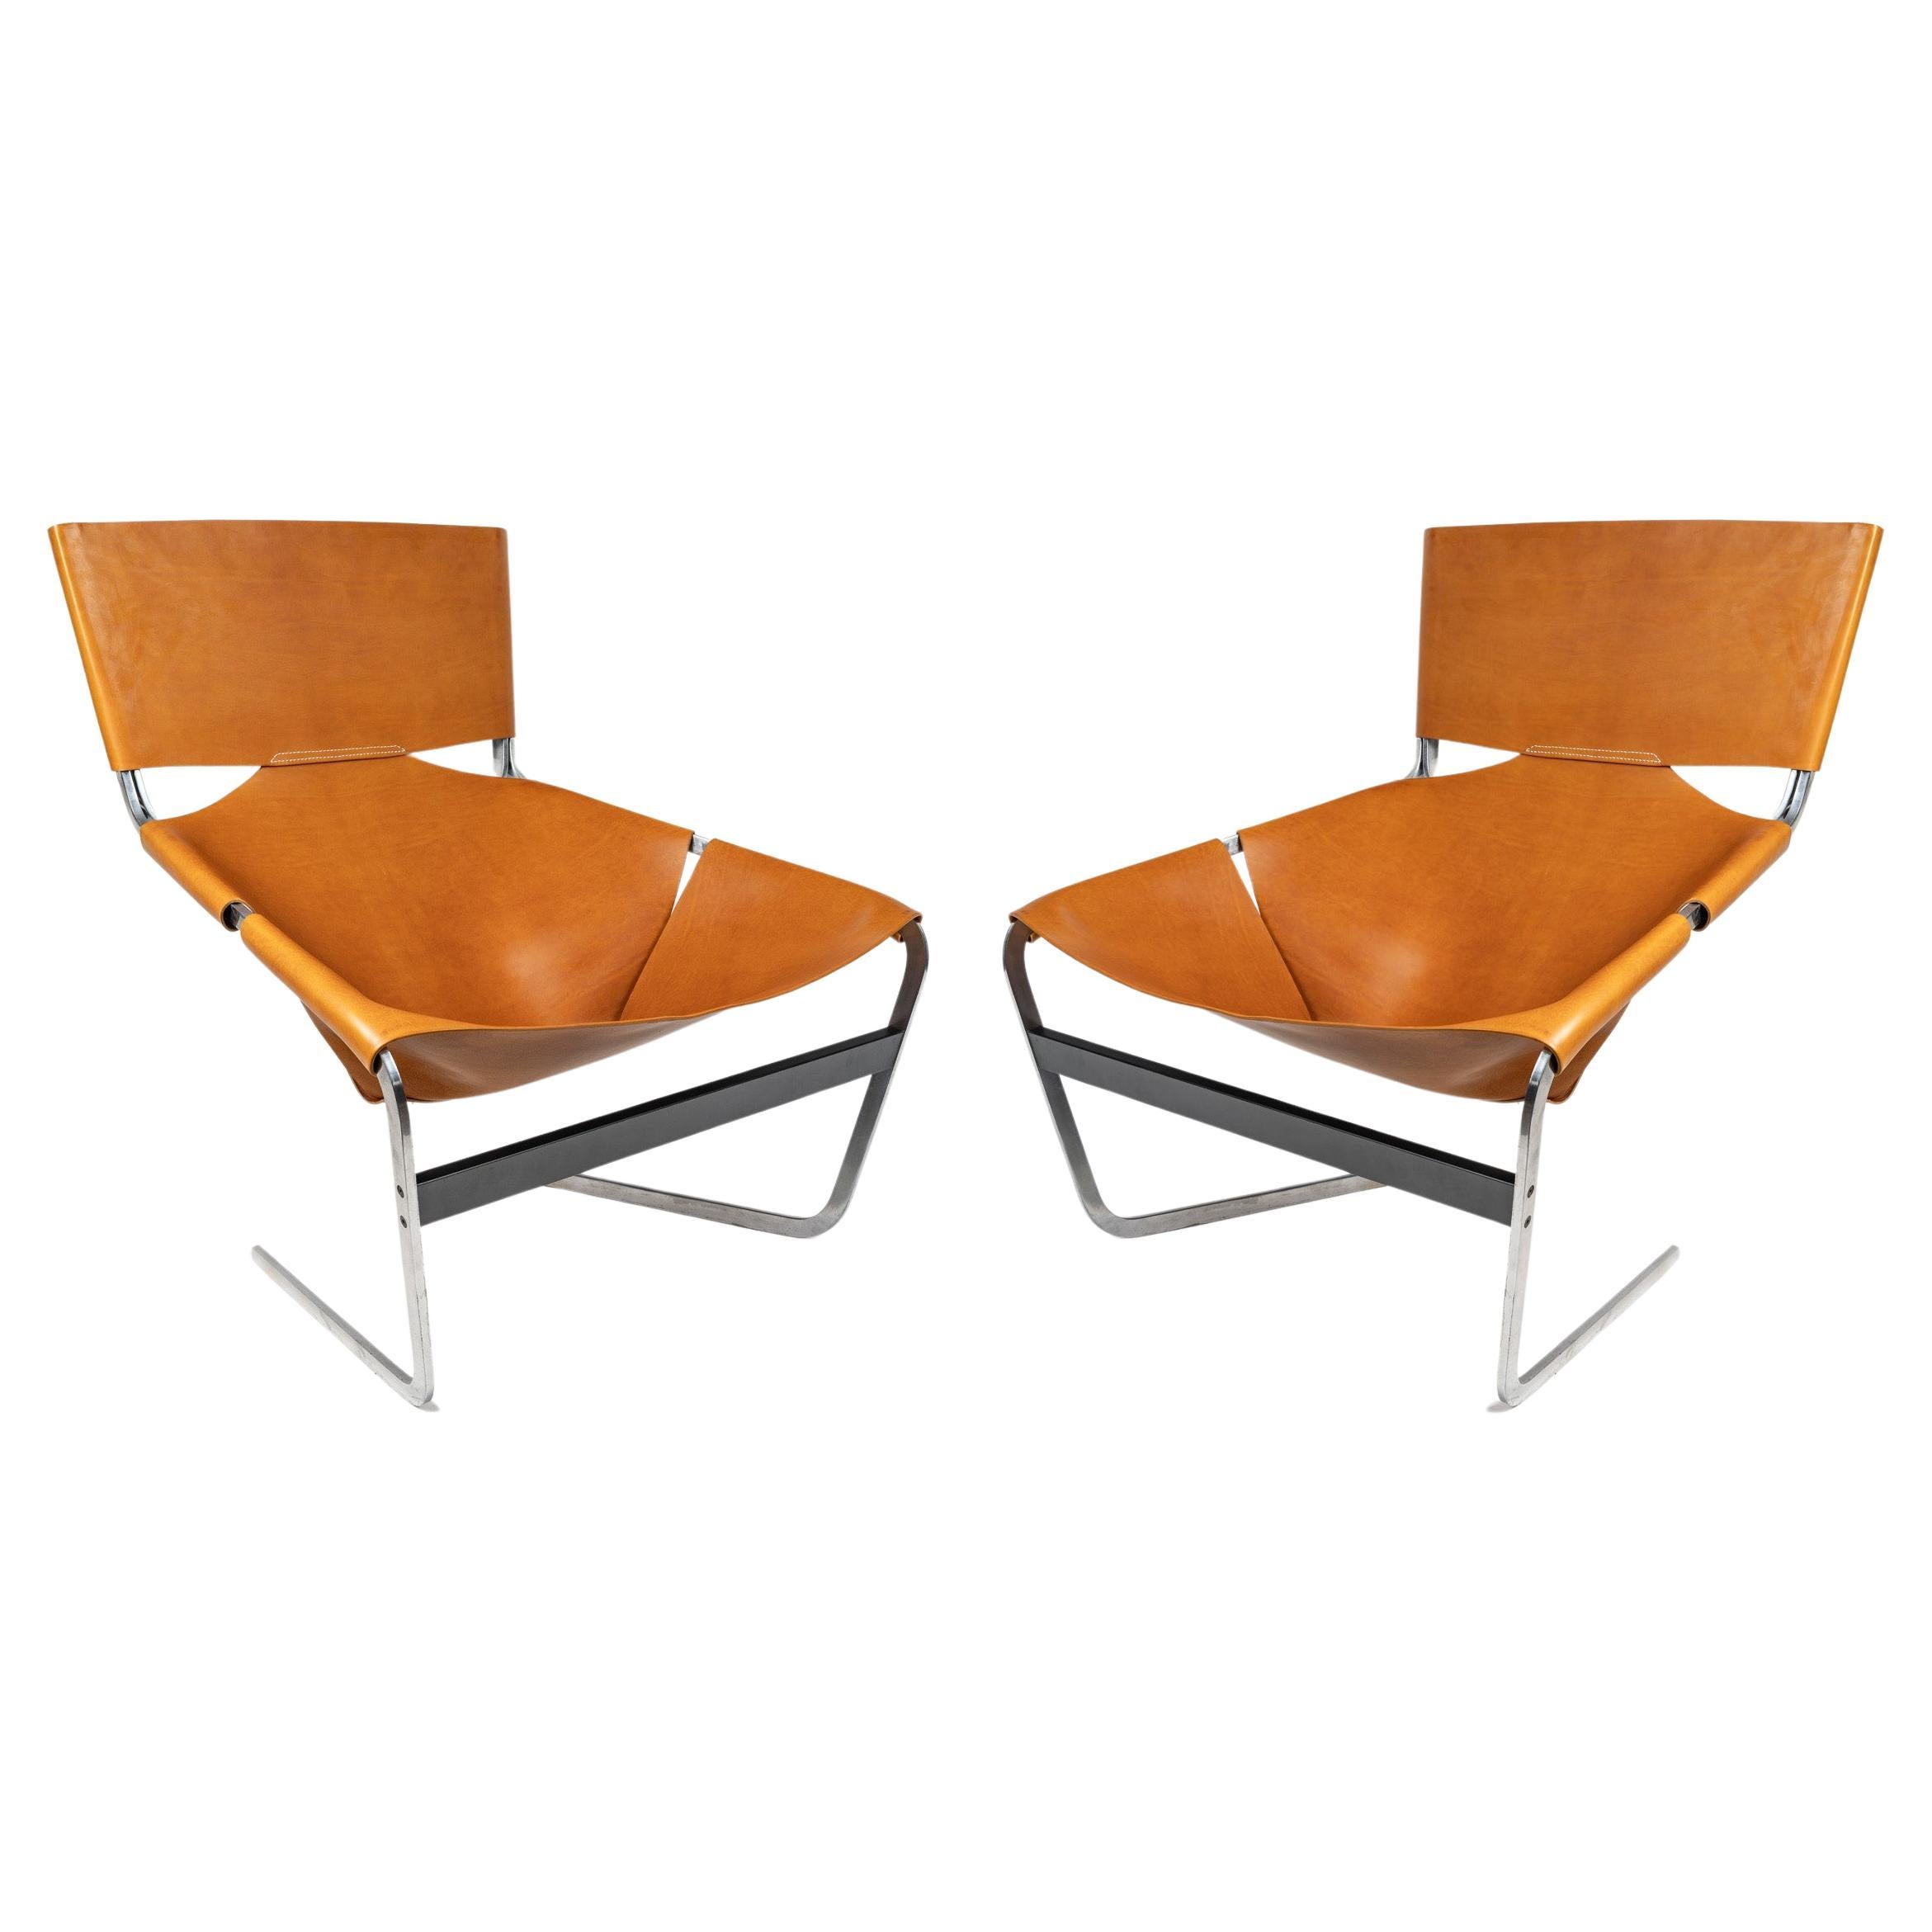 1960 Pair of Armchairs by Pierre Paulin model F444 for Artiflort For Sale